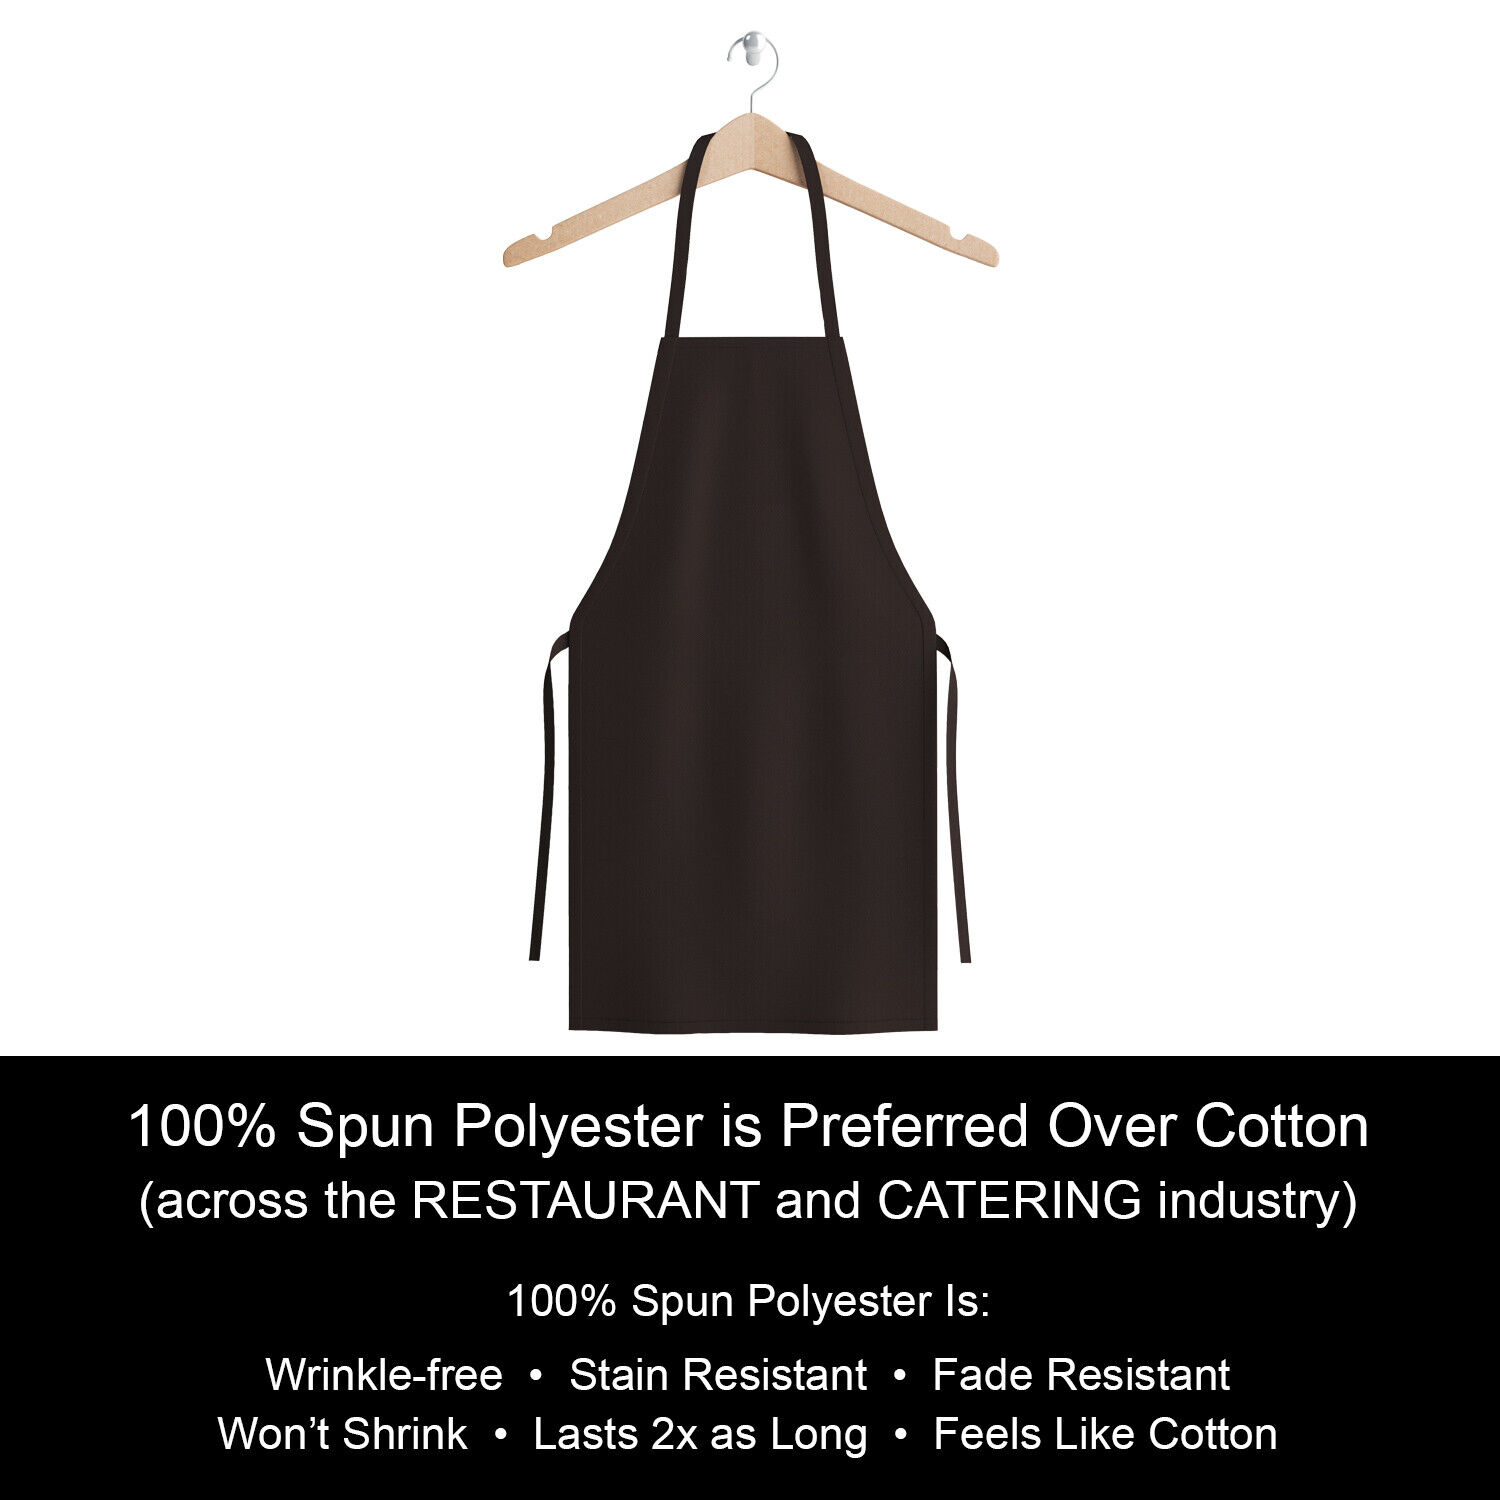 12 Pack of Kitchen Aprons - Full Bib Size Polyester Apron - Black Red or White Arkwright Does Not Apply - фотография #9